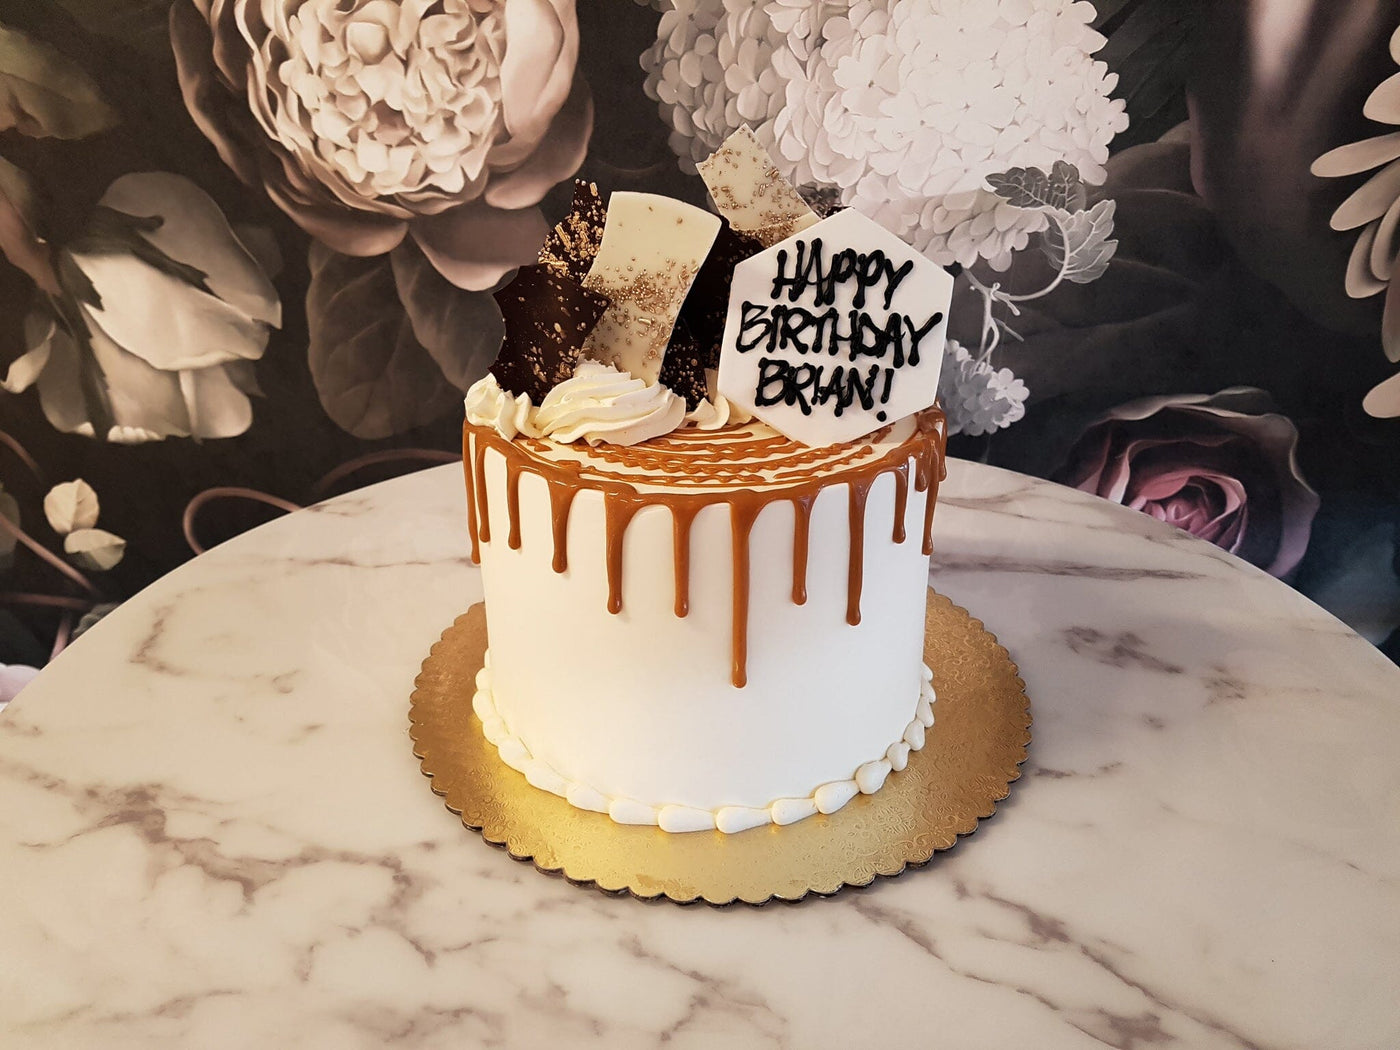 Marble Swirl with Caramel Mousse Cake | Delivery | Special Occasion Cake Cake Rolling In Dough Bakery 